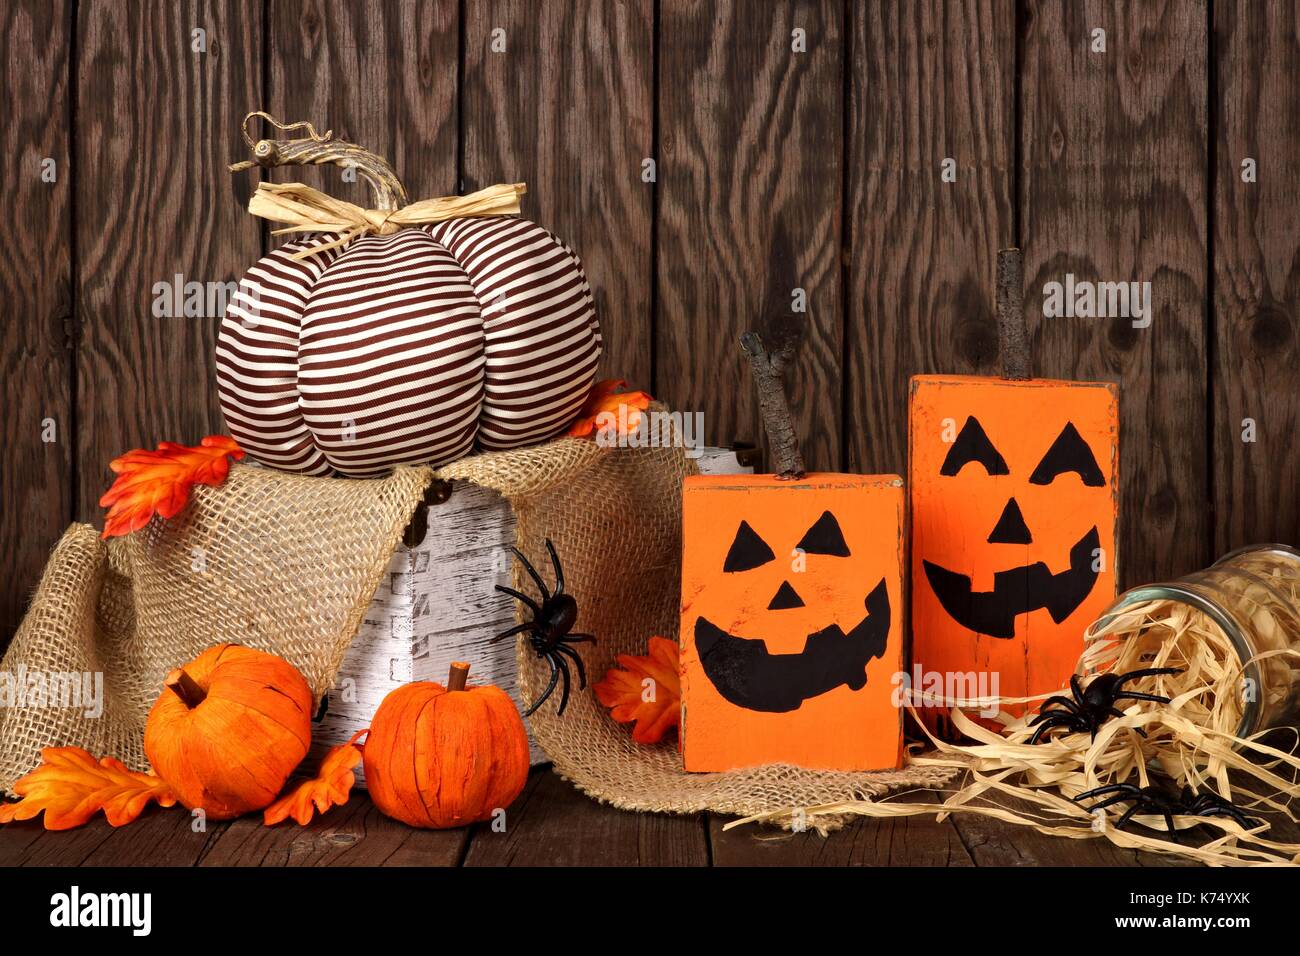 Rustic shabby chic Halloween decor against an old wood background Stock Photo